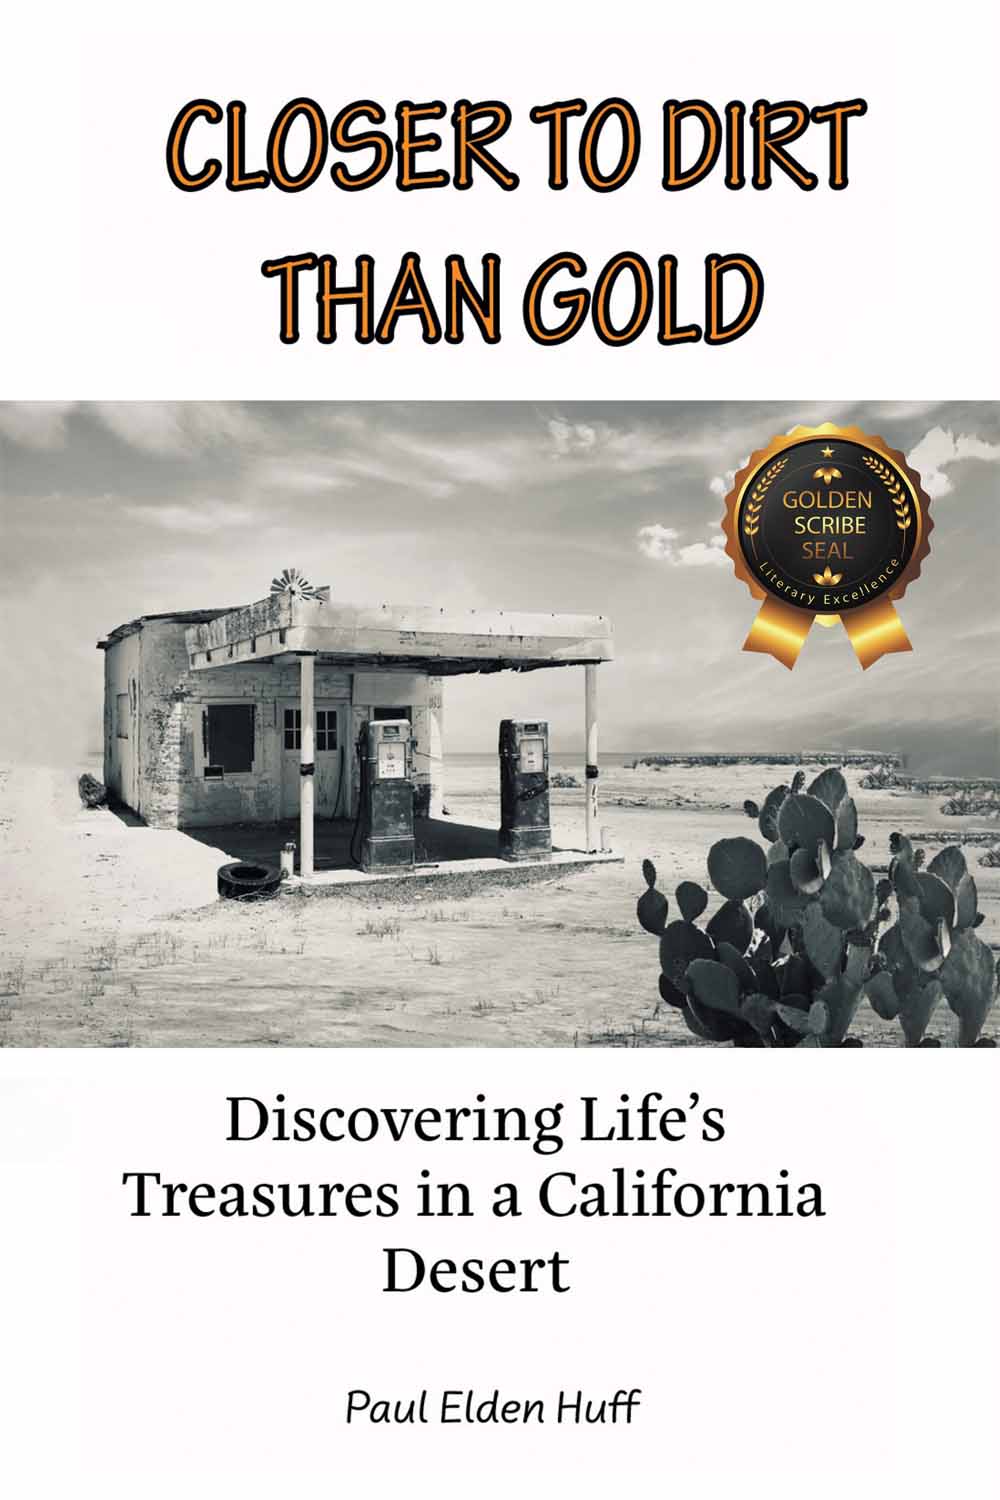 Closer To Dirt Than Gold: Discovering Life's Treasures in a California Desert by Paul Eden Huff